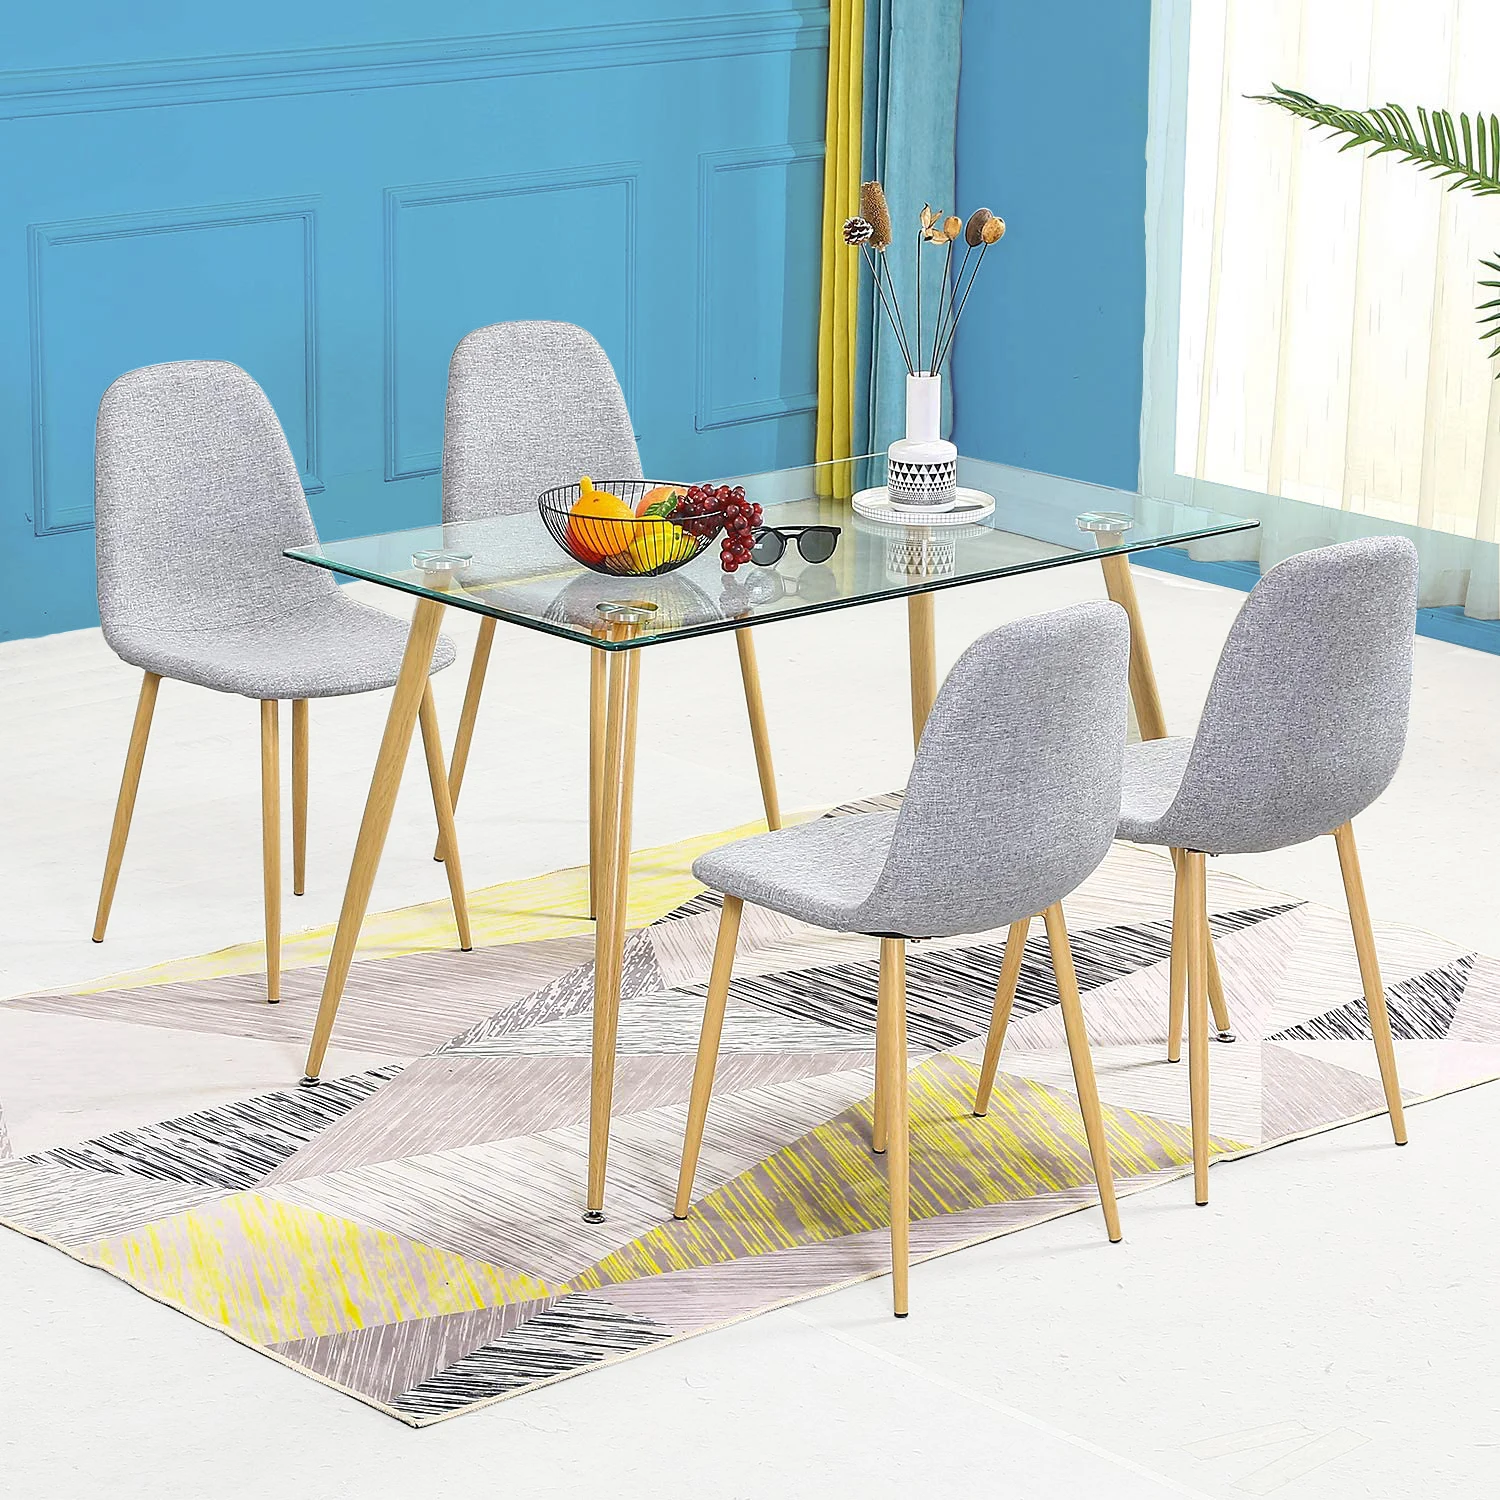 Kitchen Dinning Room Furniture Modern Glass Dining Table Set With Rectangle Glass Top And Wood Printed Transfer Metal Legs Buy Glass Table